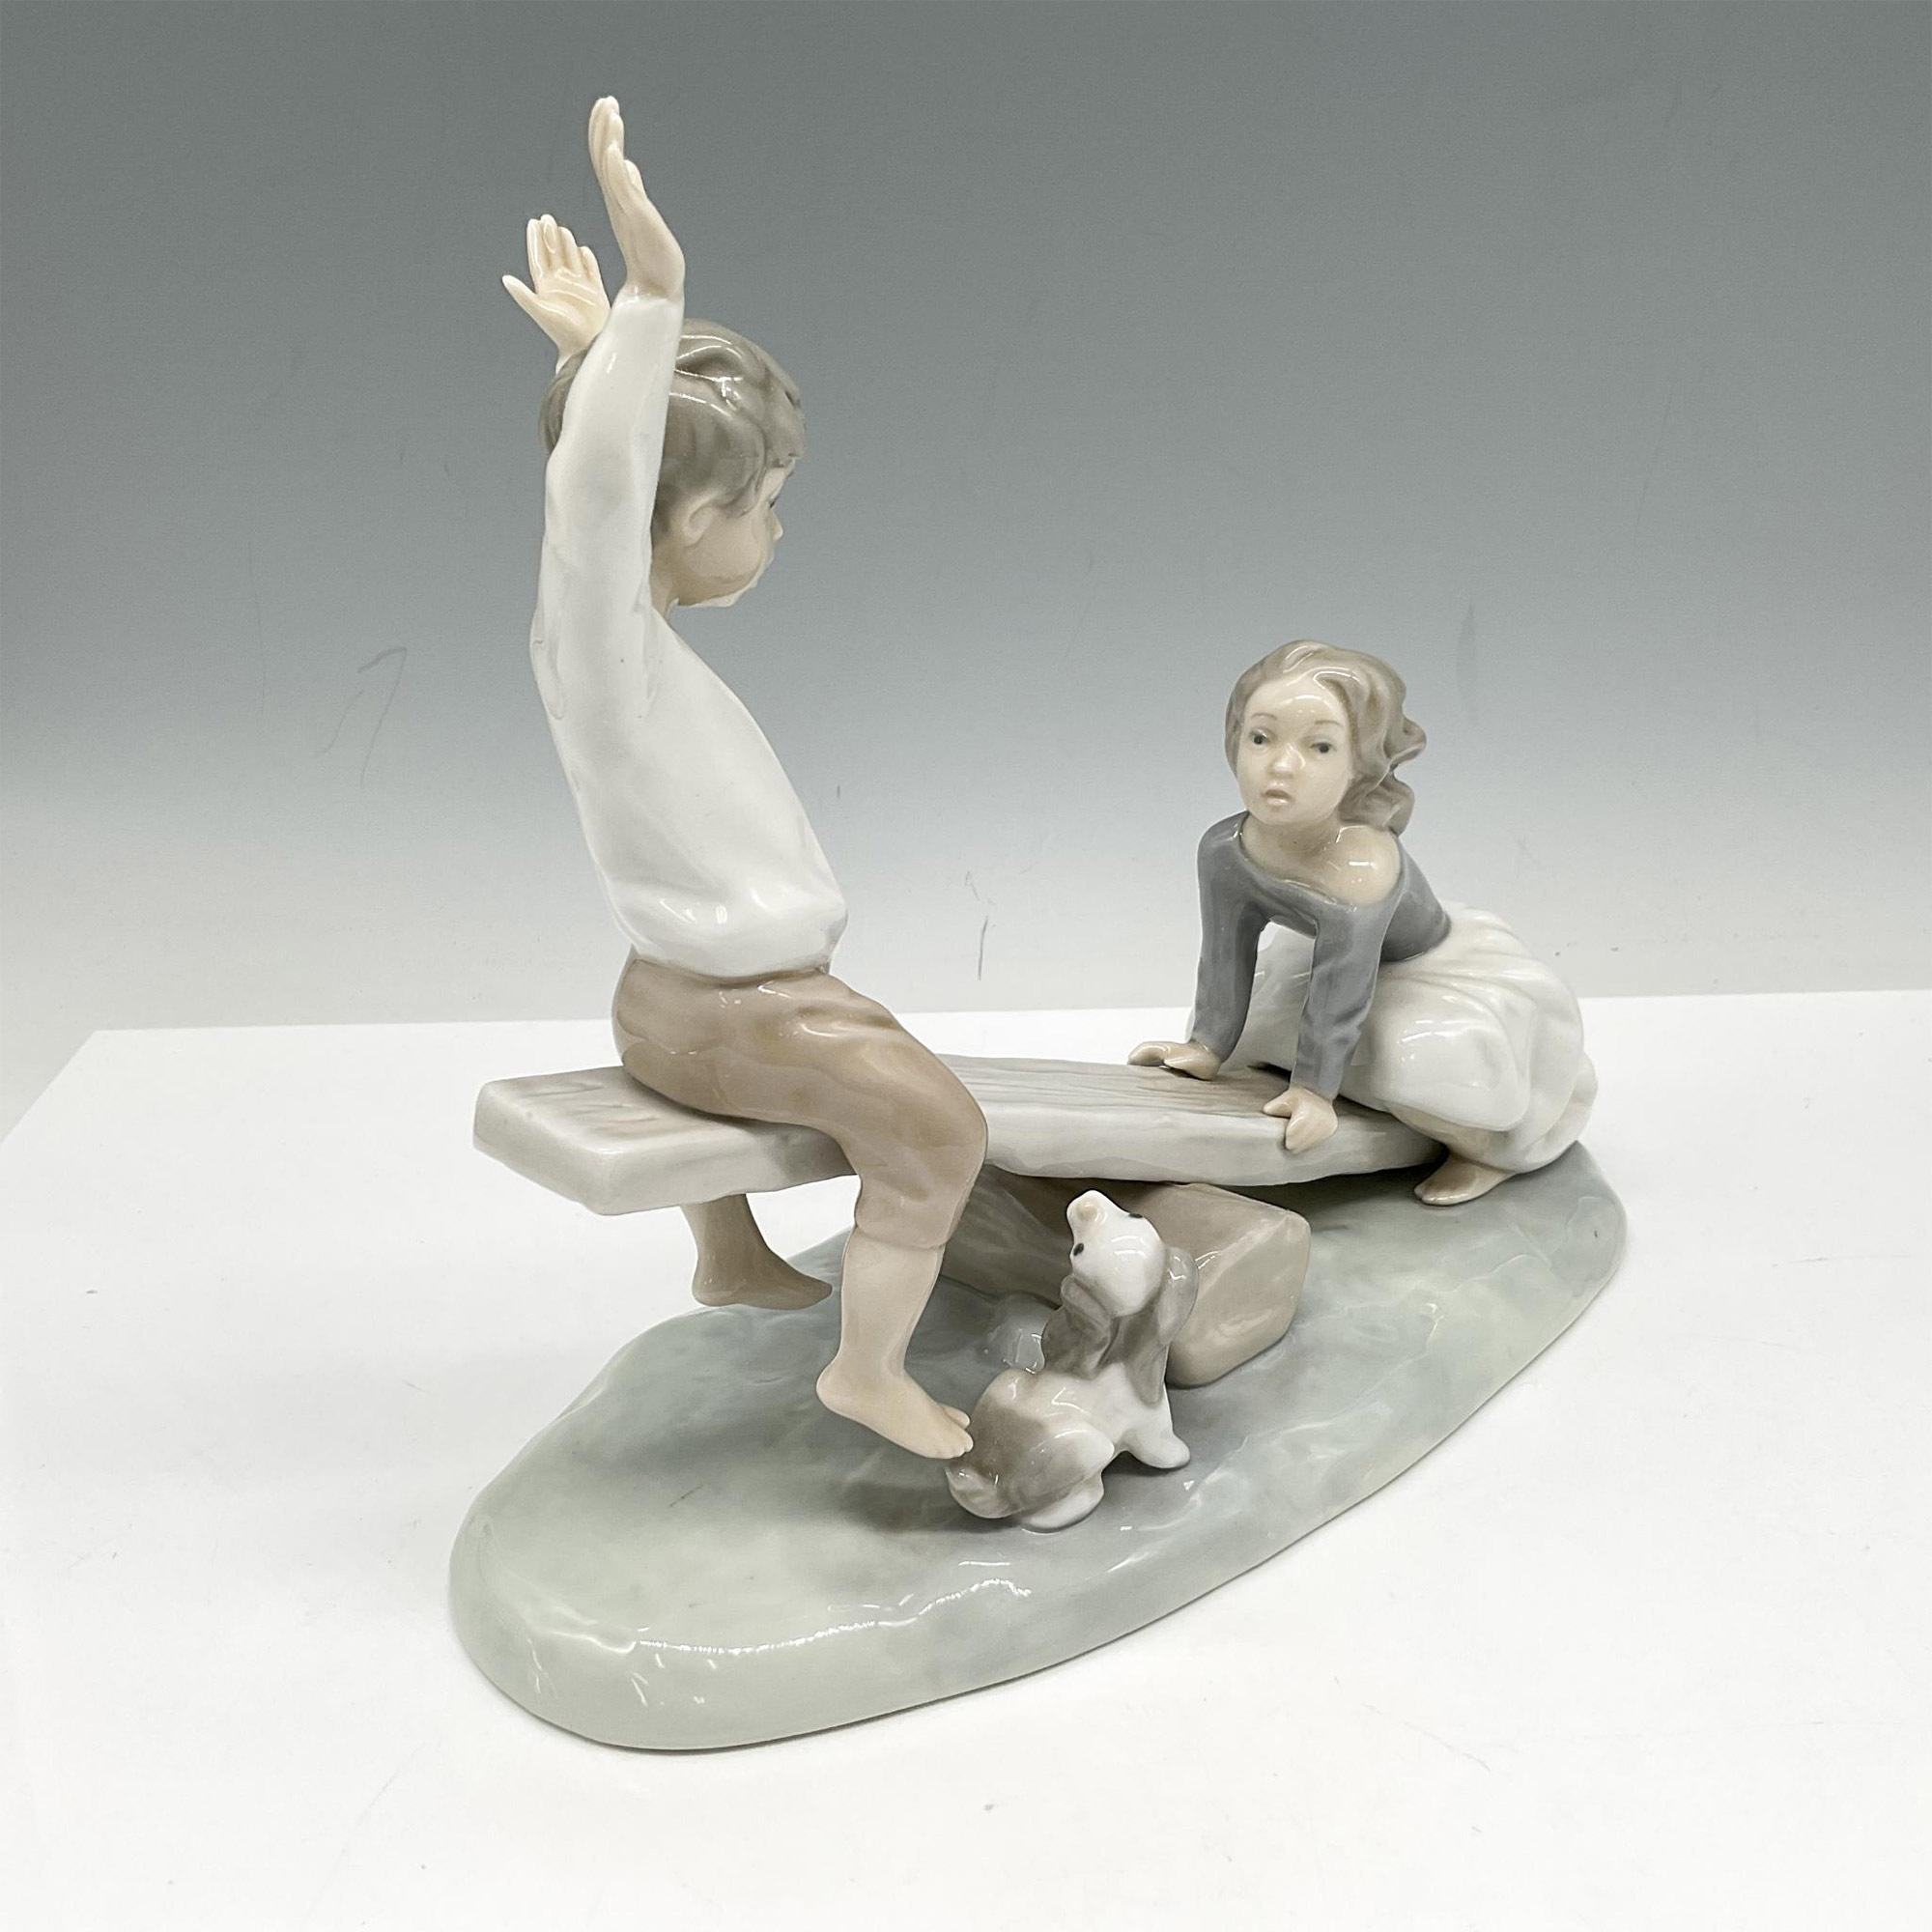 See-Saw 1004867 - Lladro Porcelain Figurine - Image 2 of 4